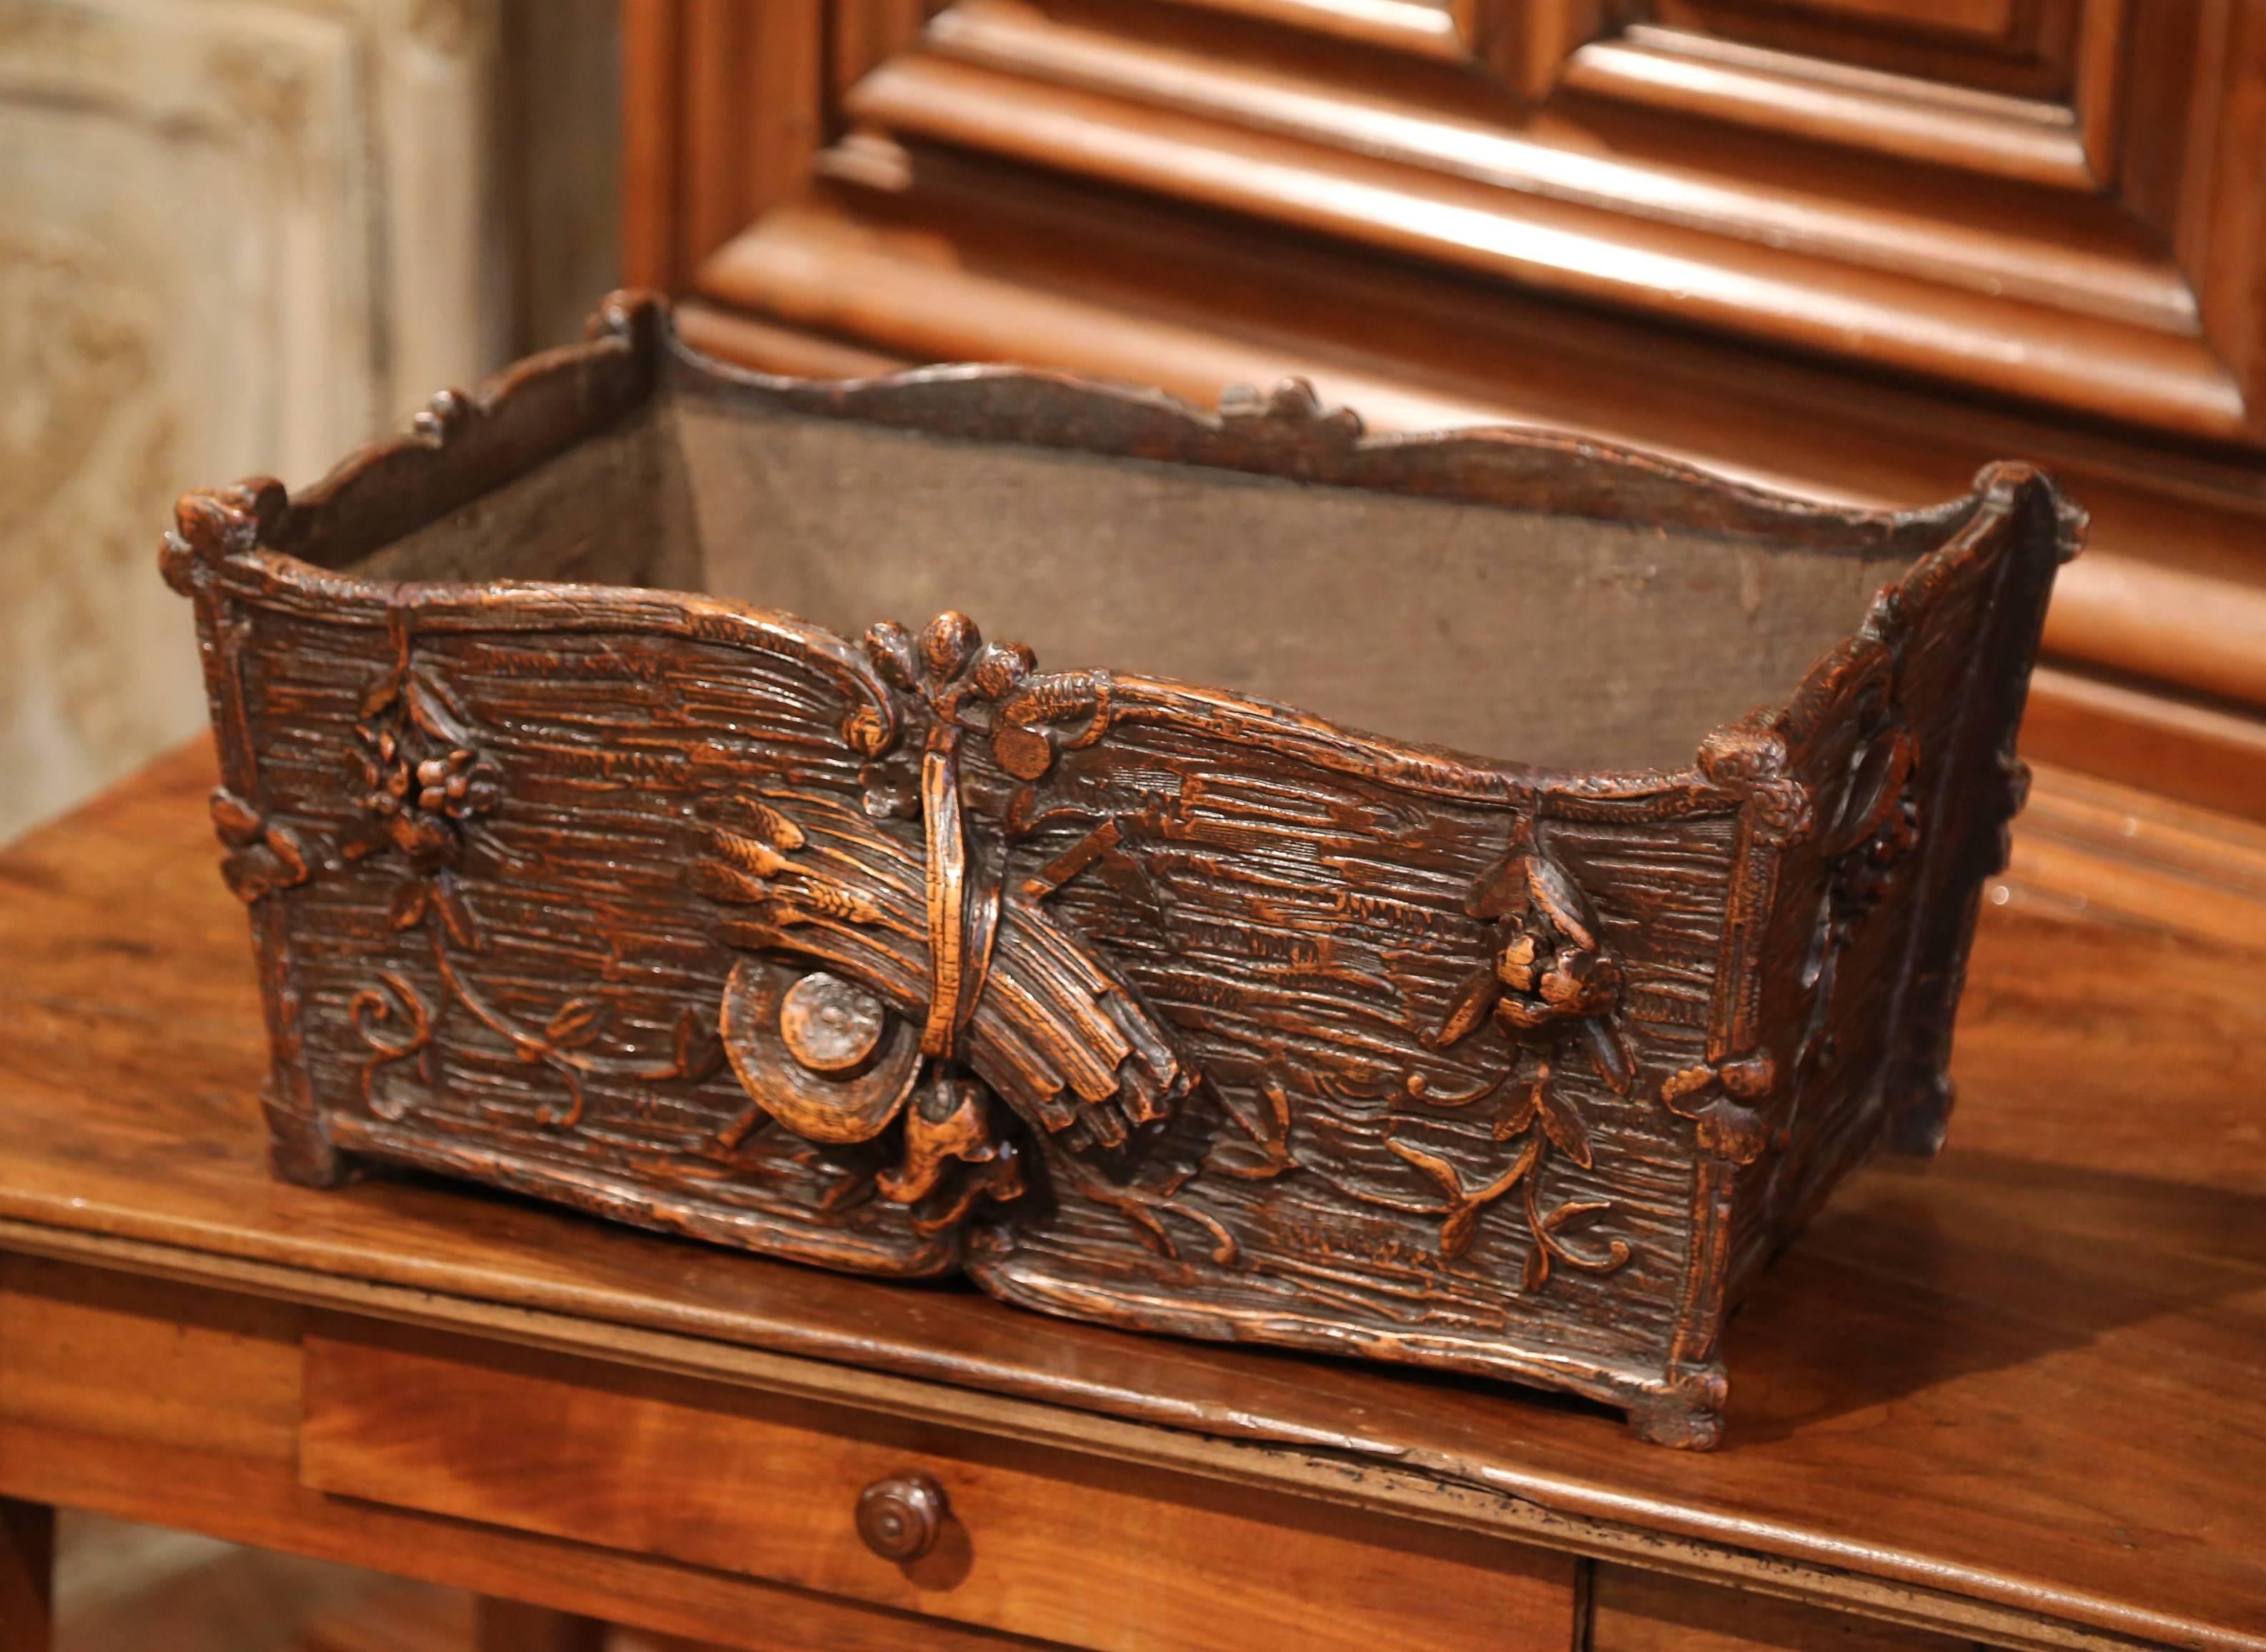 This elegant antique jardiniere carved as a log was crafted in France, circa 1870. The detailed, rectangular planter features fine hand carvings that include wheat, flowers, and even a pair of clogs and a farmer’s hat. The piece is in excellent